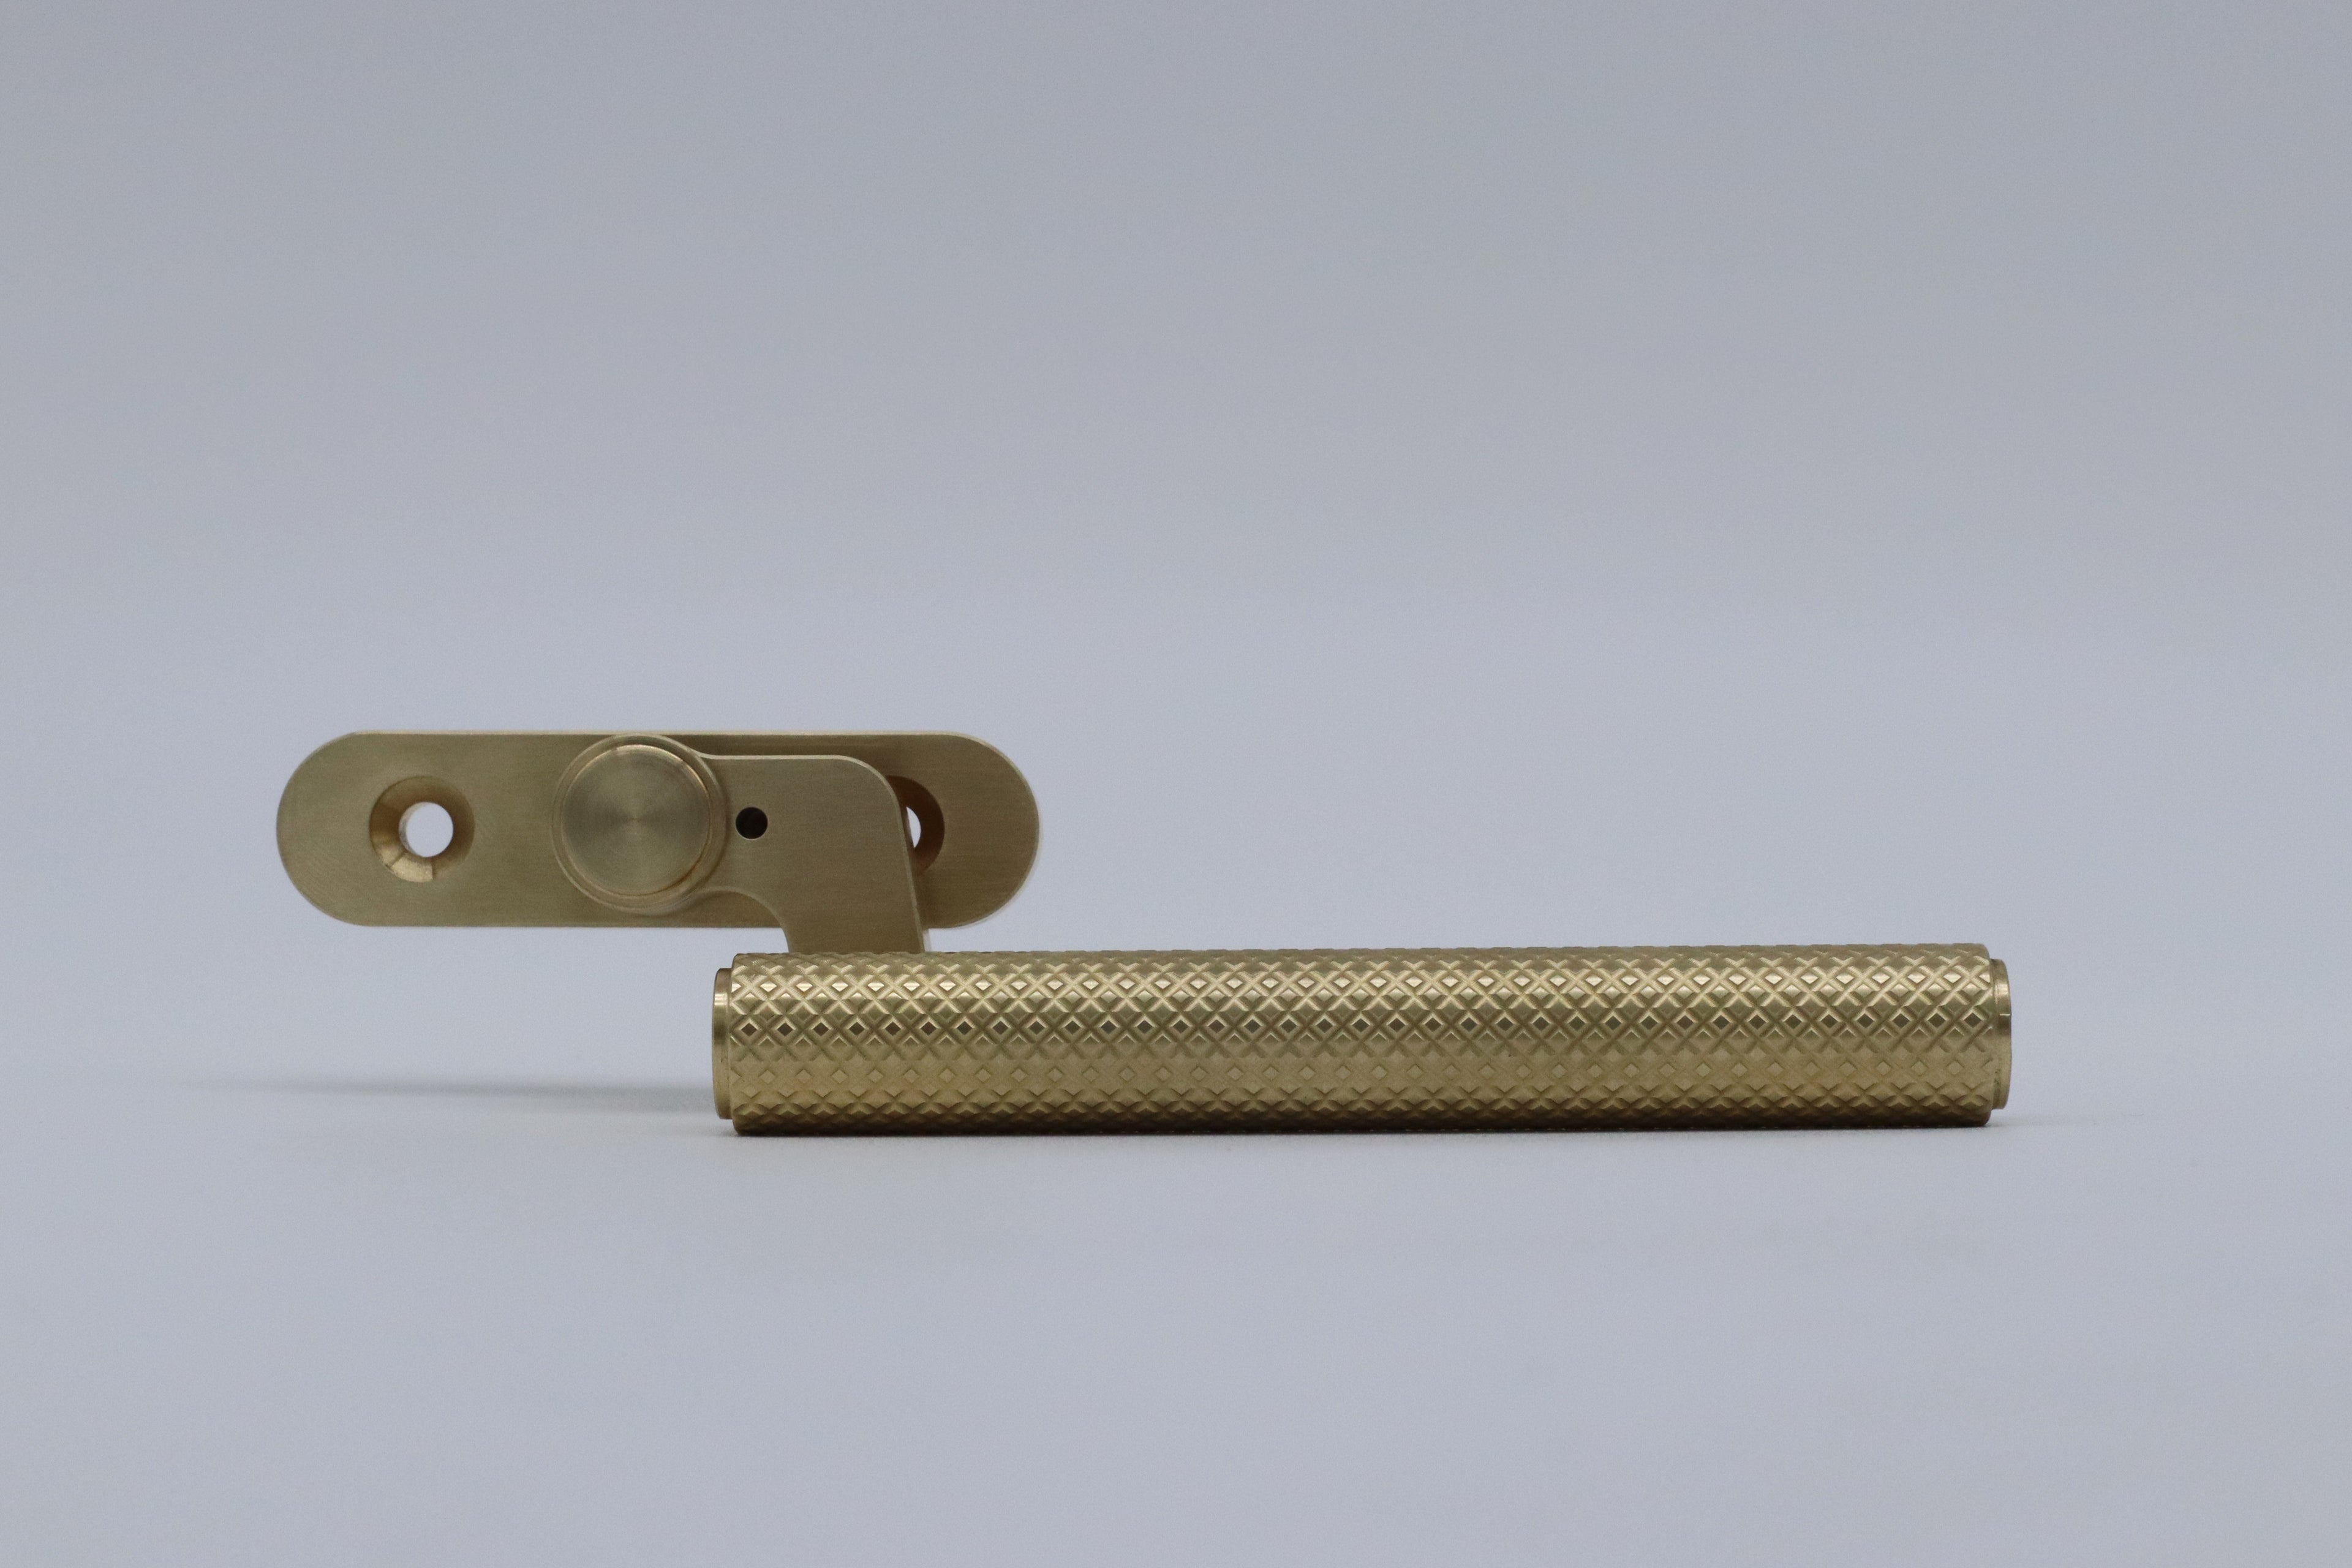 solid brass knurled window handle lever for modern homes. luxury brass ware. luxury window. brass window accessories. solid brass. made in the uk